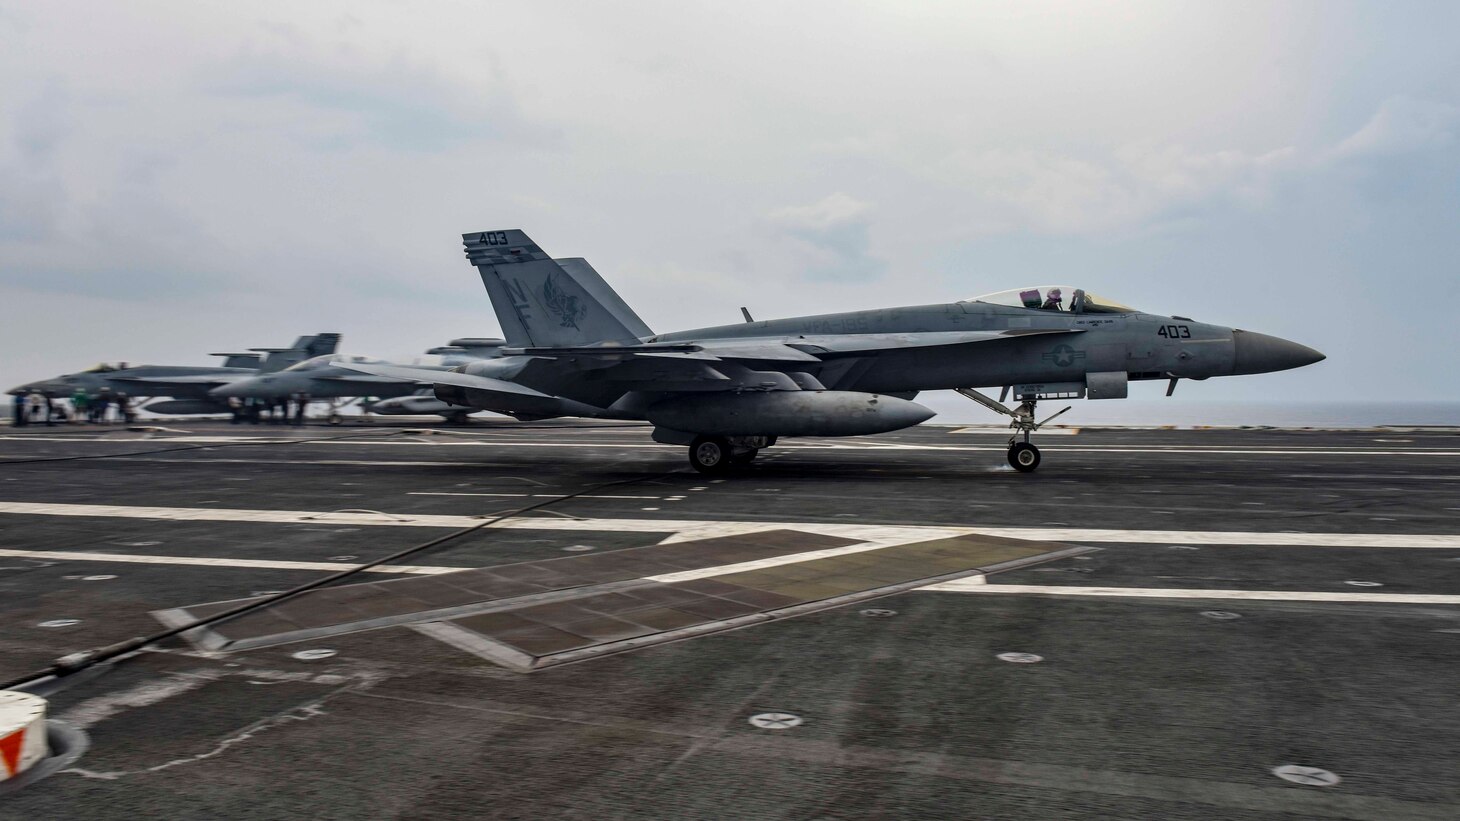 An F/A-18E Super Hornet, assigned to Strike Fighter Squadron (VFA) 195, lands on the flight deck during carrier qualifications with the Navy's forward-deployed aircraft carrier, USS Ronald Reagan (CVN 76), and Carrier Air Wing 5. Ronald Reagan, the flagship of Carrier Strike Group 5, provides a combat-ready force that protects and defends the collective maritime interests of its allies and partners in the Indo-Pacific region.